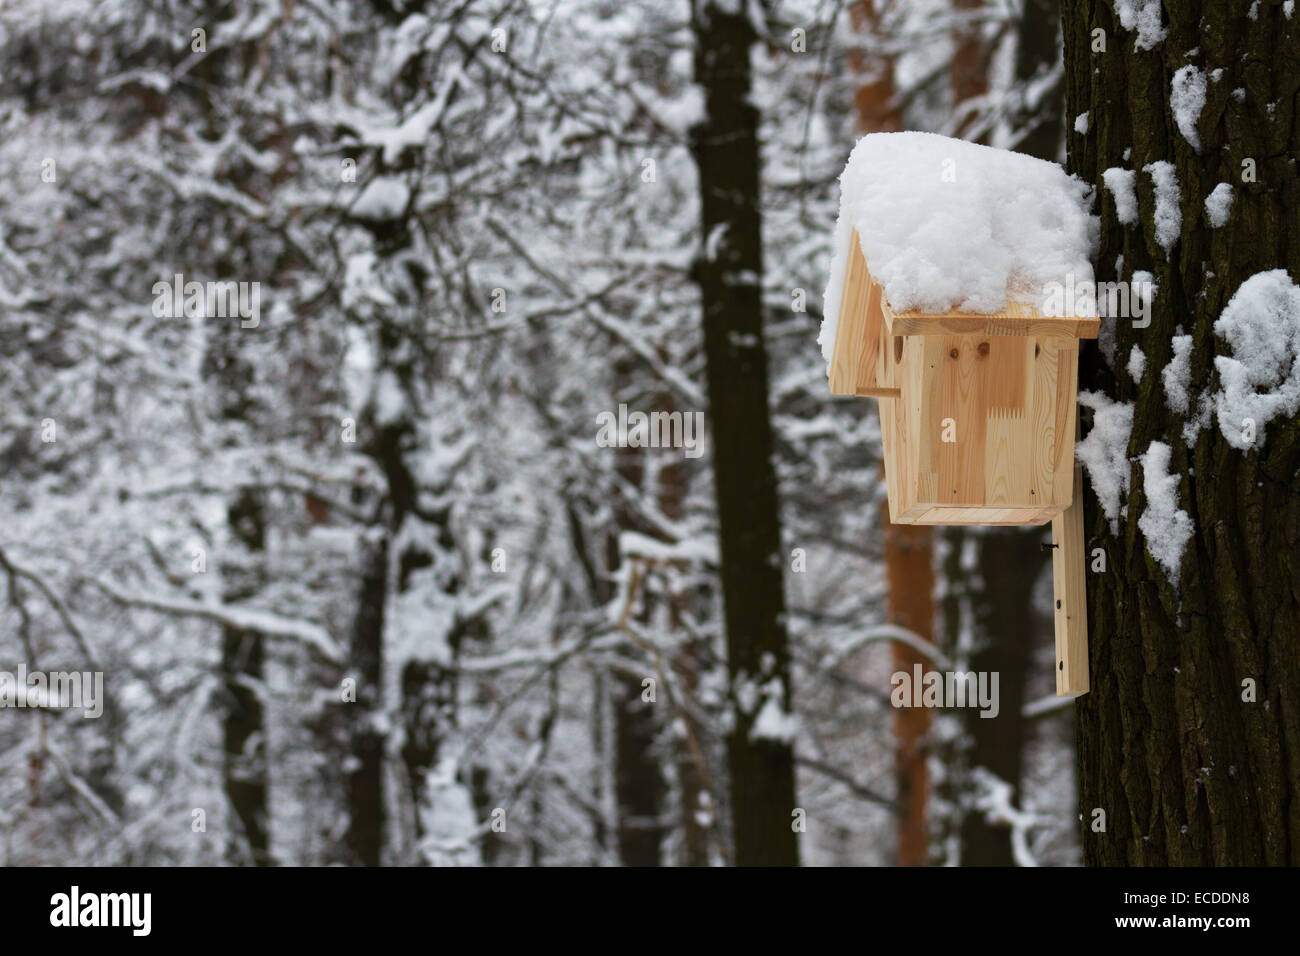 Wooden house for the birds in winter Park. Covered with snow Stock Photo